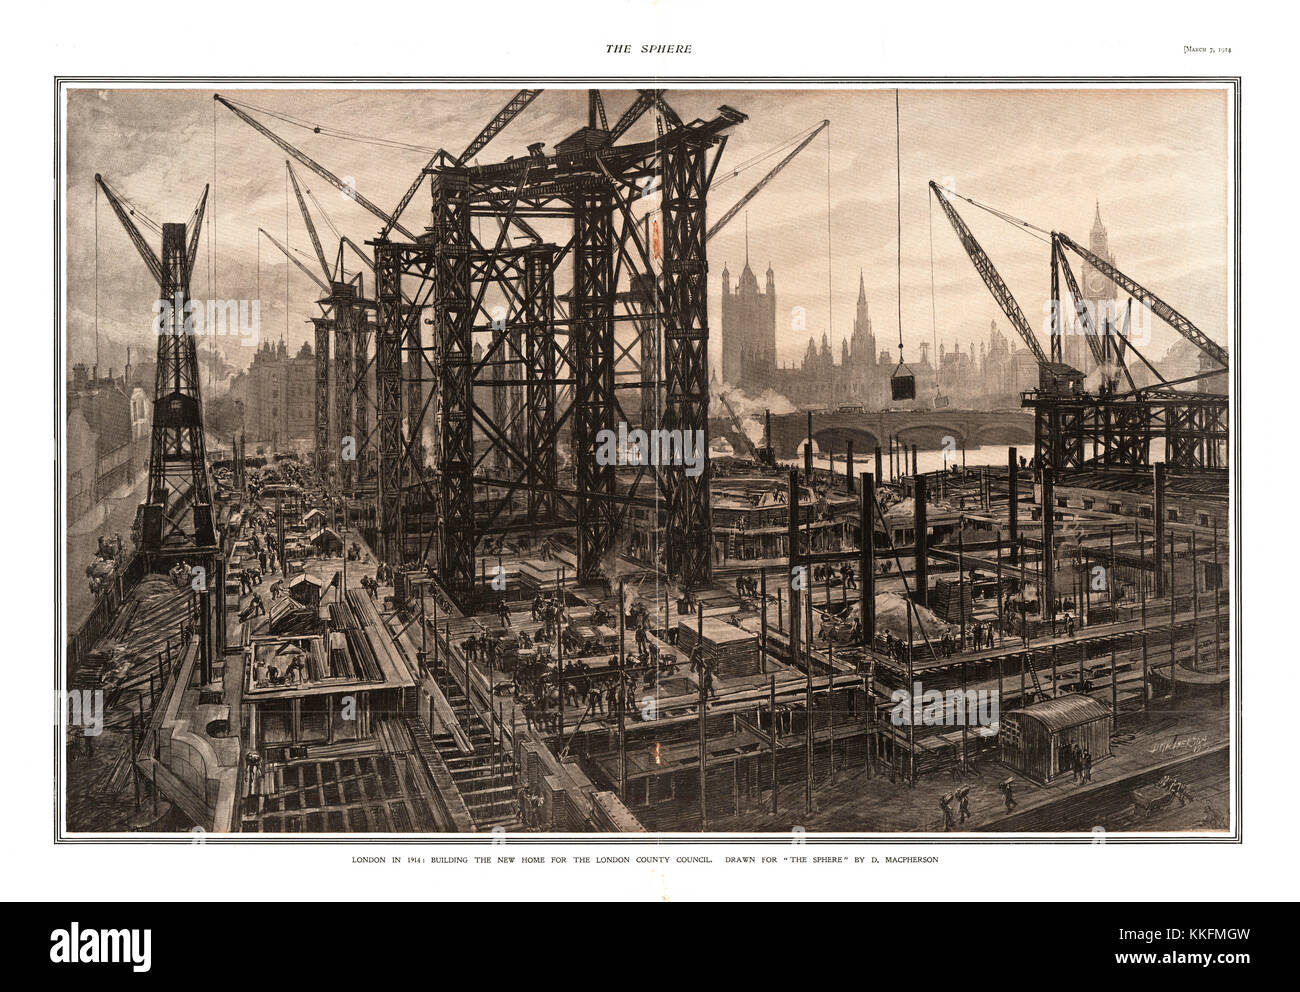 1914 The Sphere Construction of London County Council Building Stock Photo